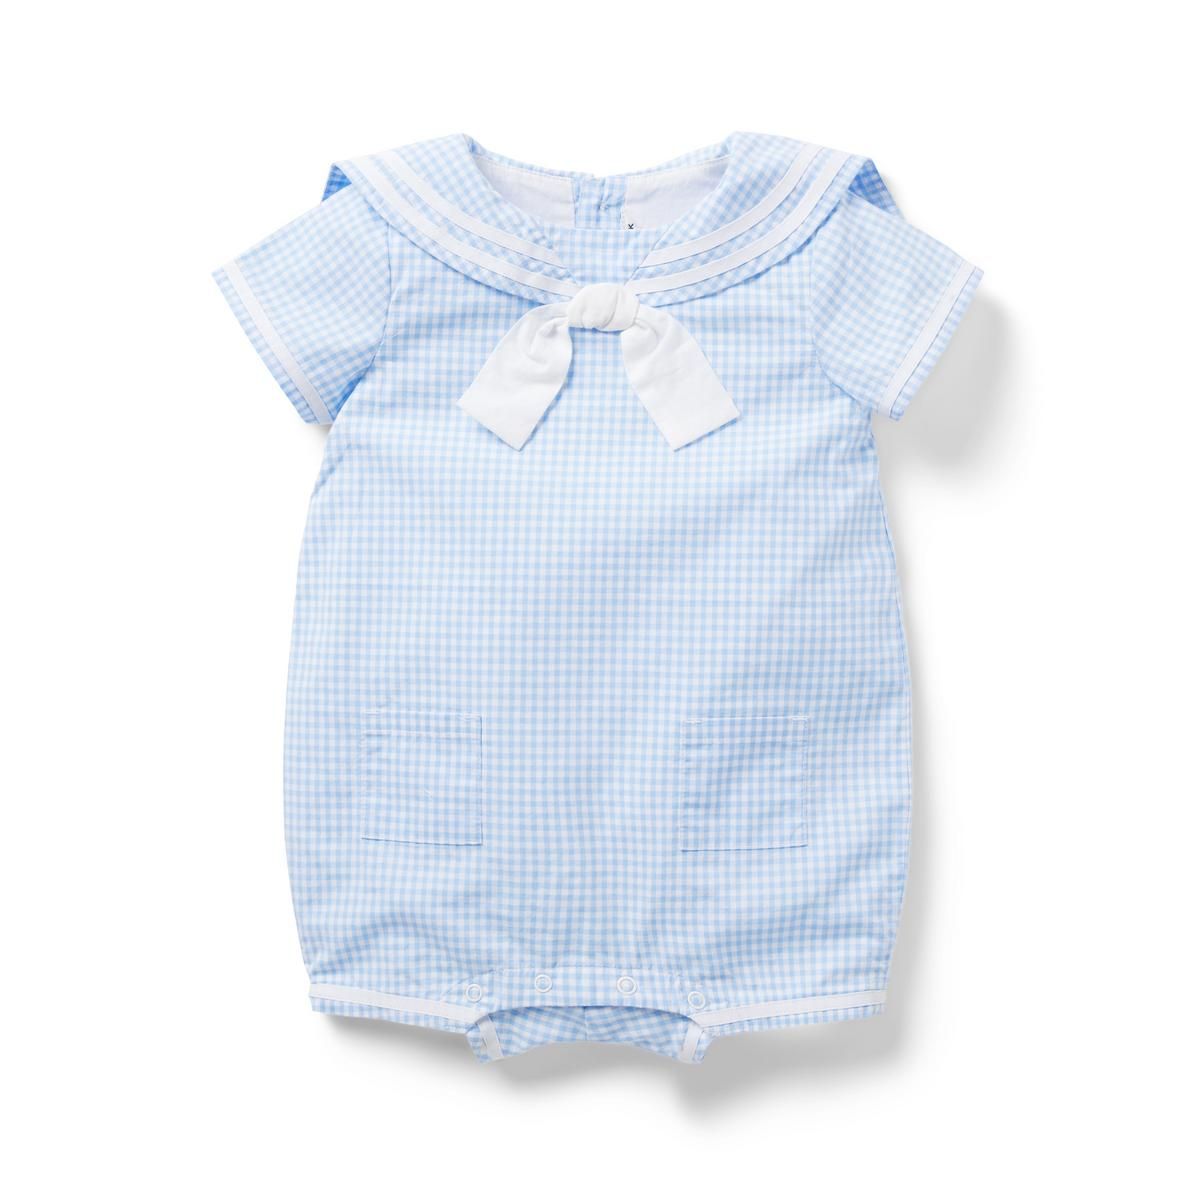 The Gingham Sailor Baby Romper | Janie and Jack